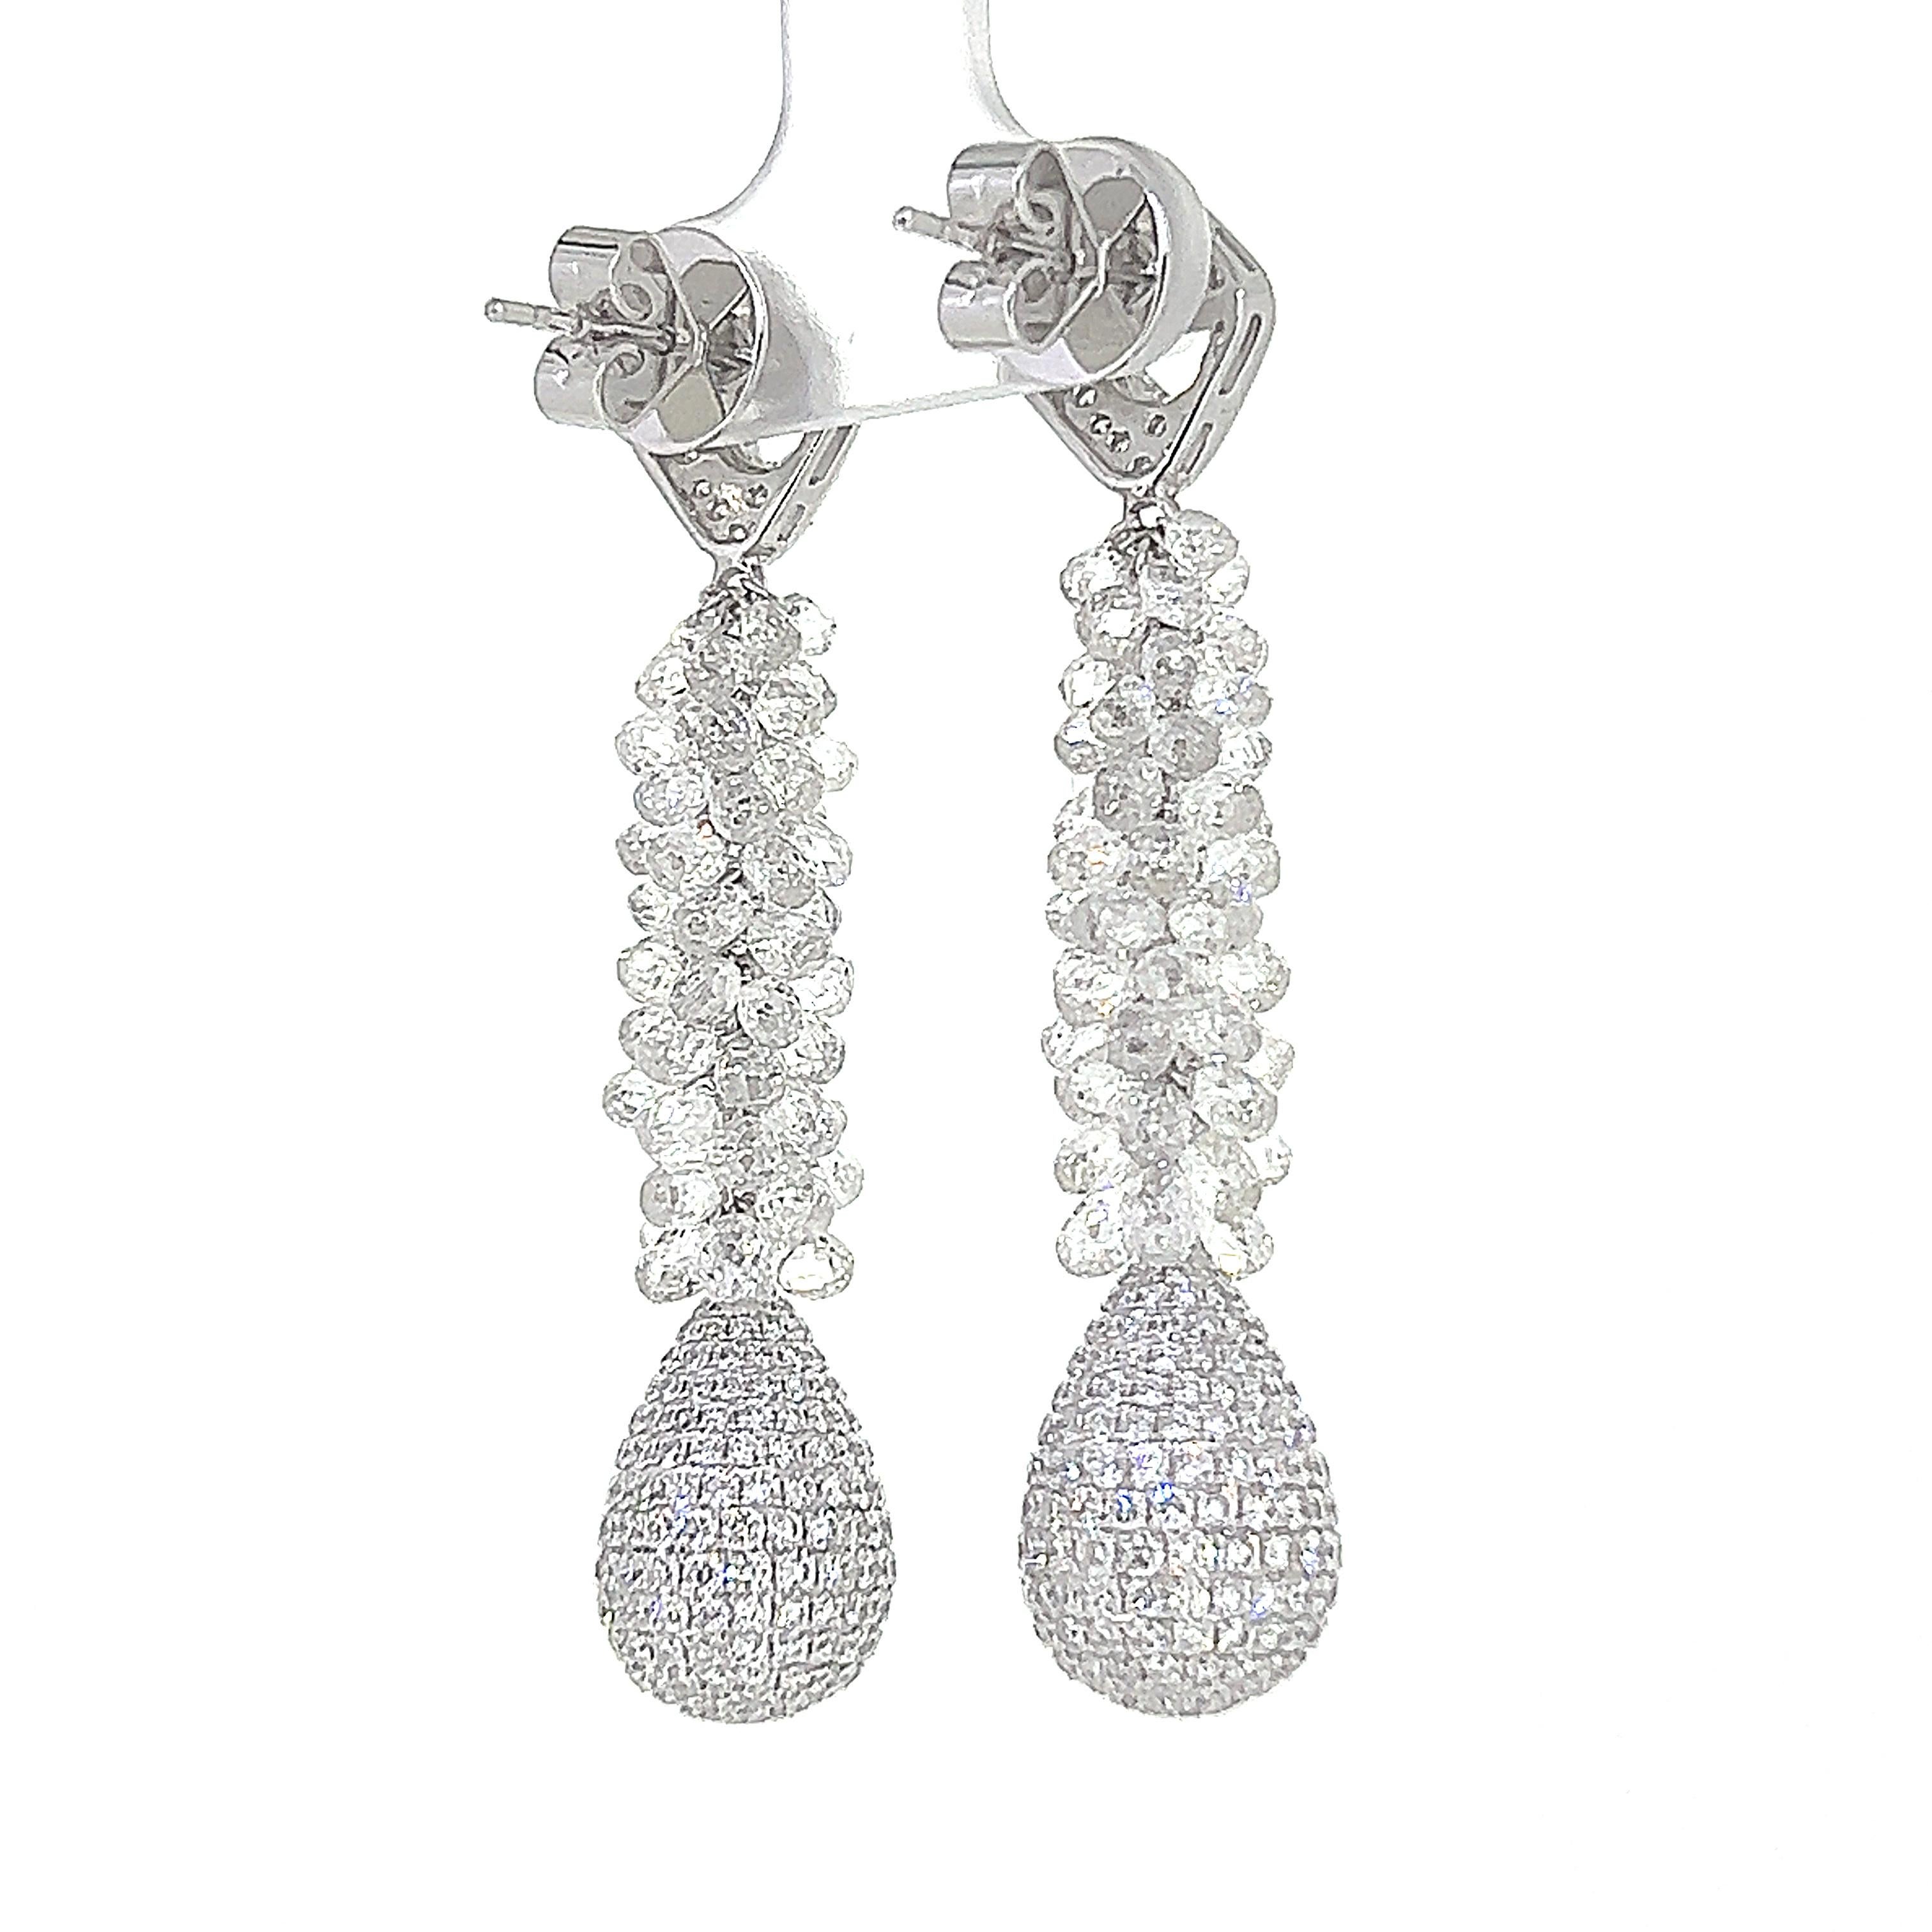 This is an eye-catching and elegant dangling earrings of exceptional quality weighing 24.00 carats in total.  This stunning 1920 inspired pair features 673 pieces of Briolette cut and Round Brilliant cut diamonds set on 18 Karat White Gold.  The